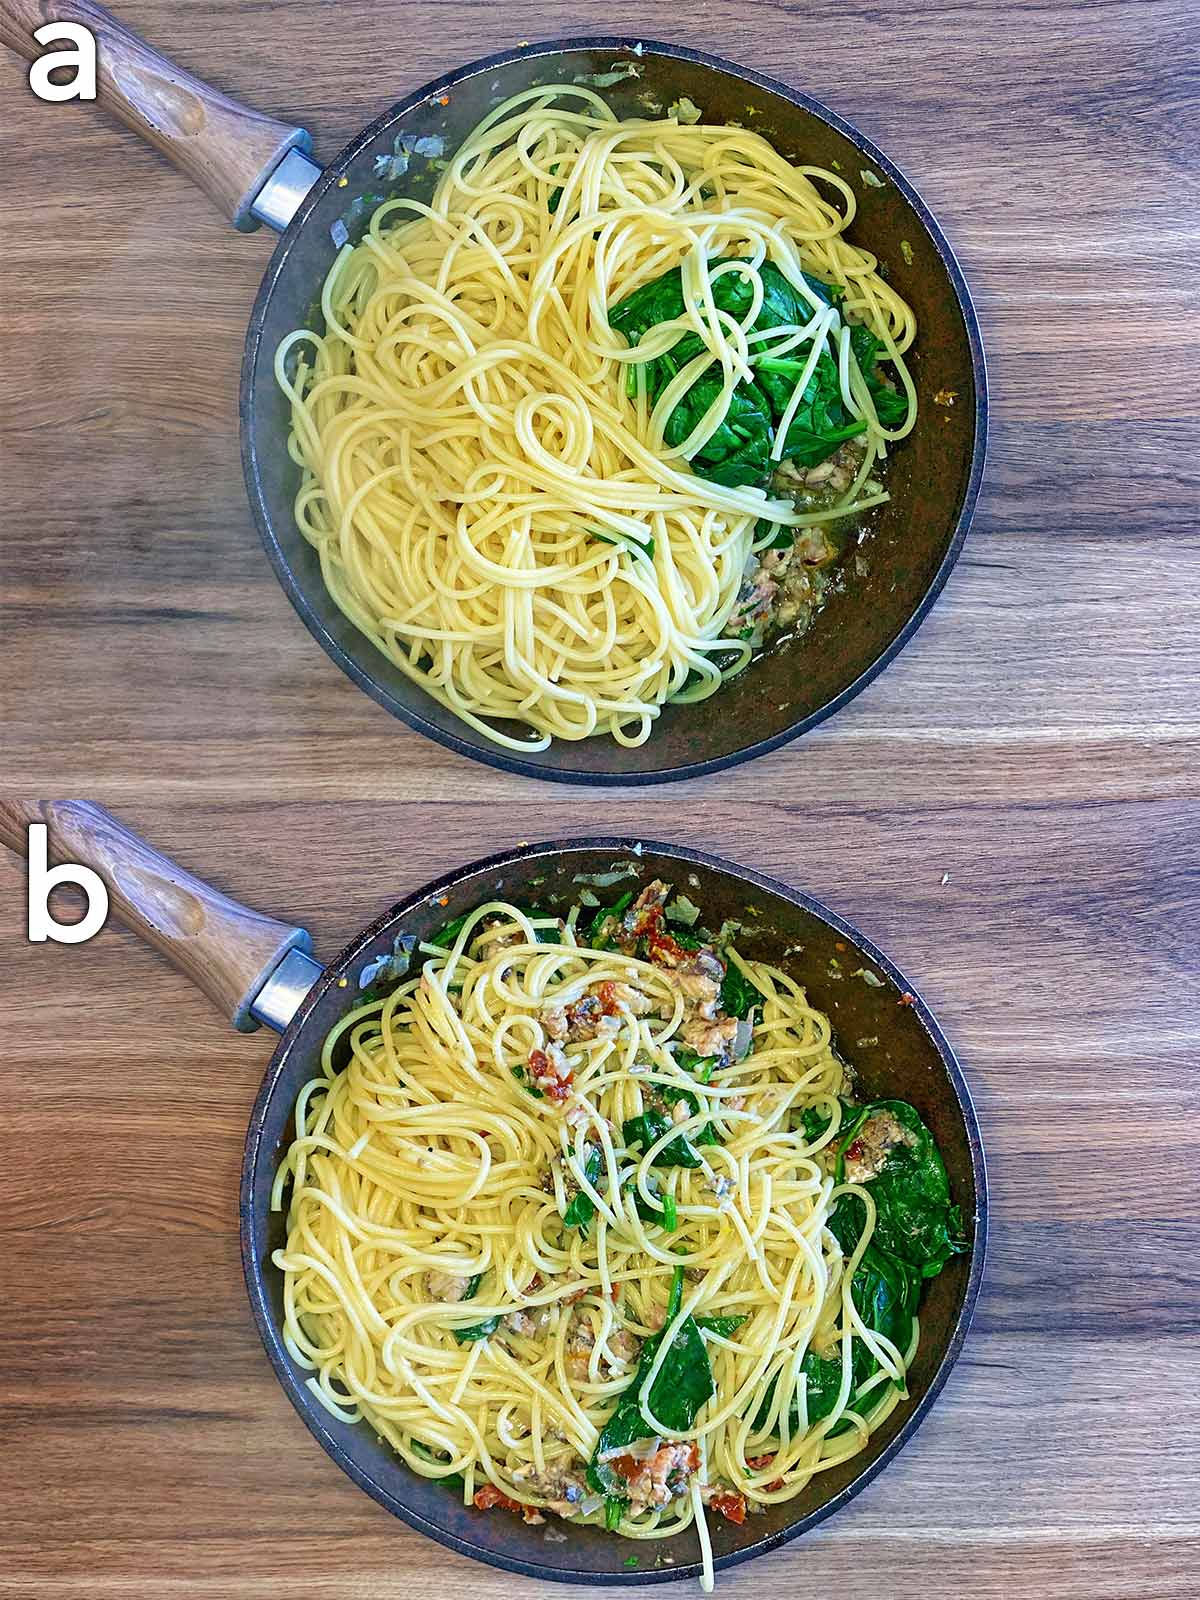 Two shot collage of the spaghetti anf spinach added to the sardine mixture, before and after mixing.